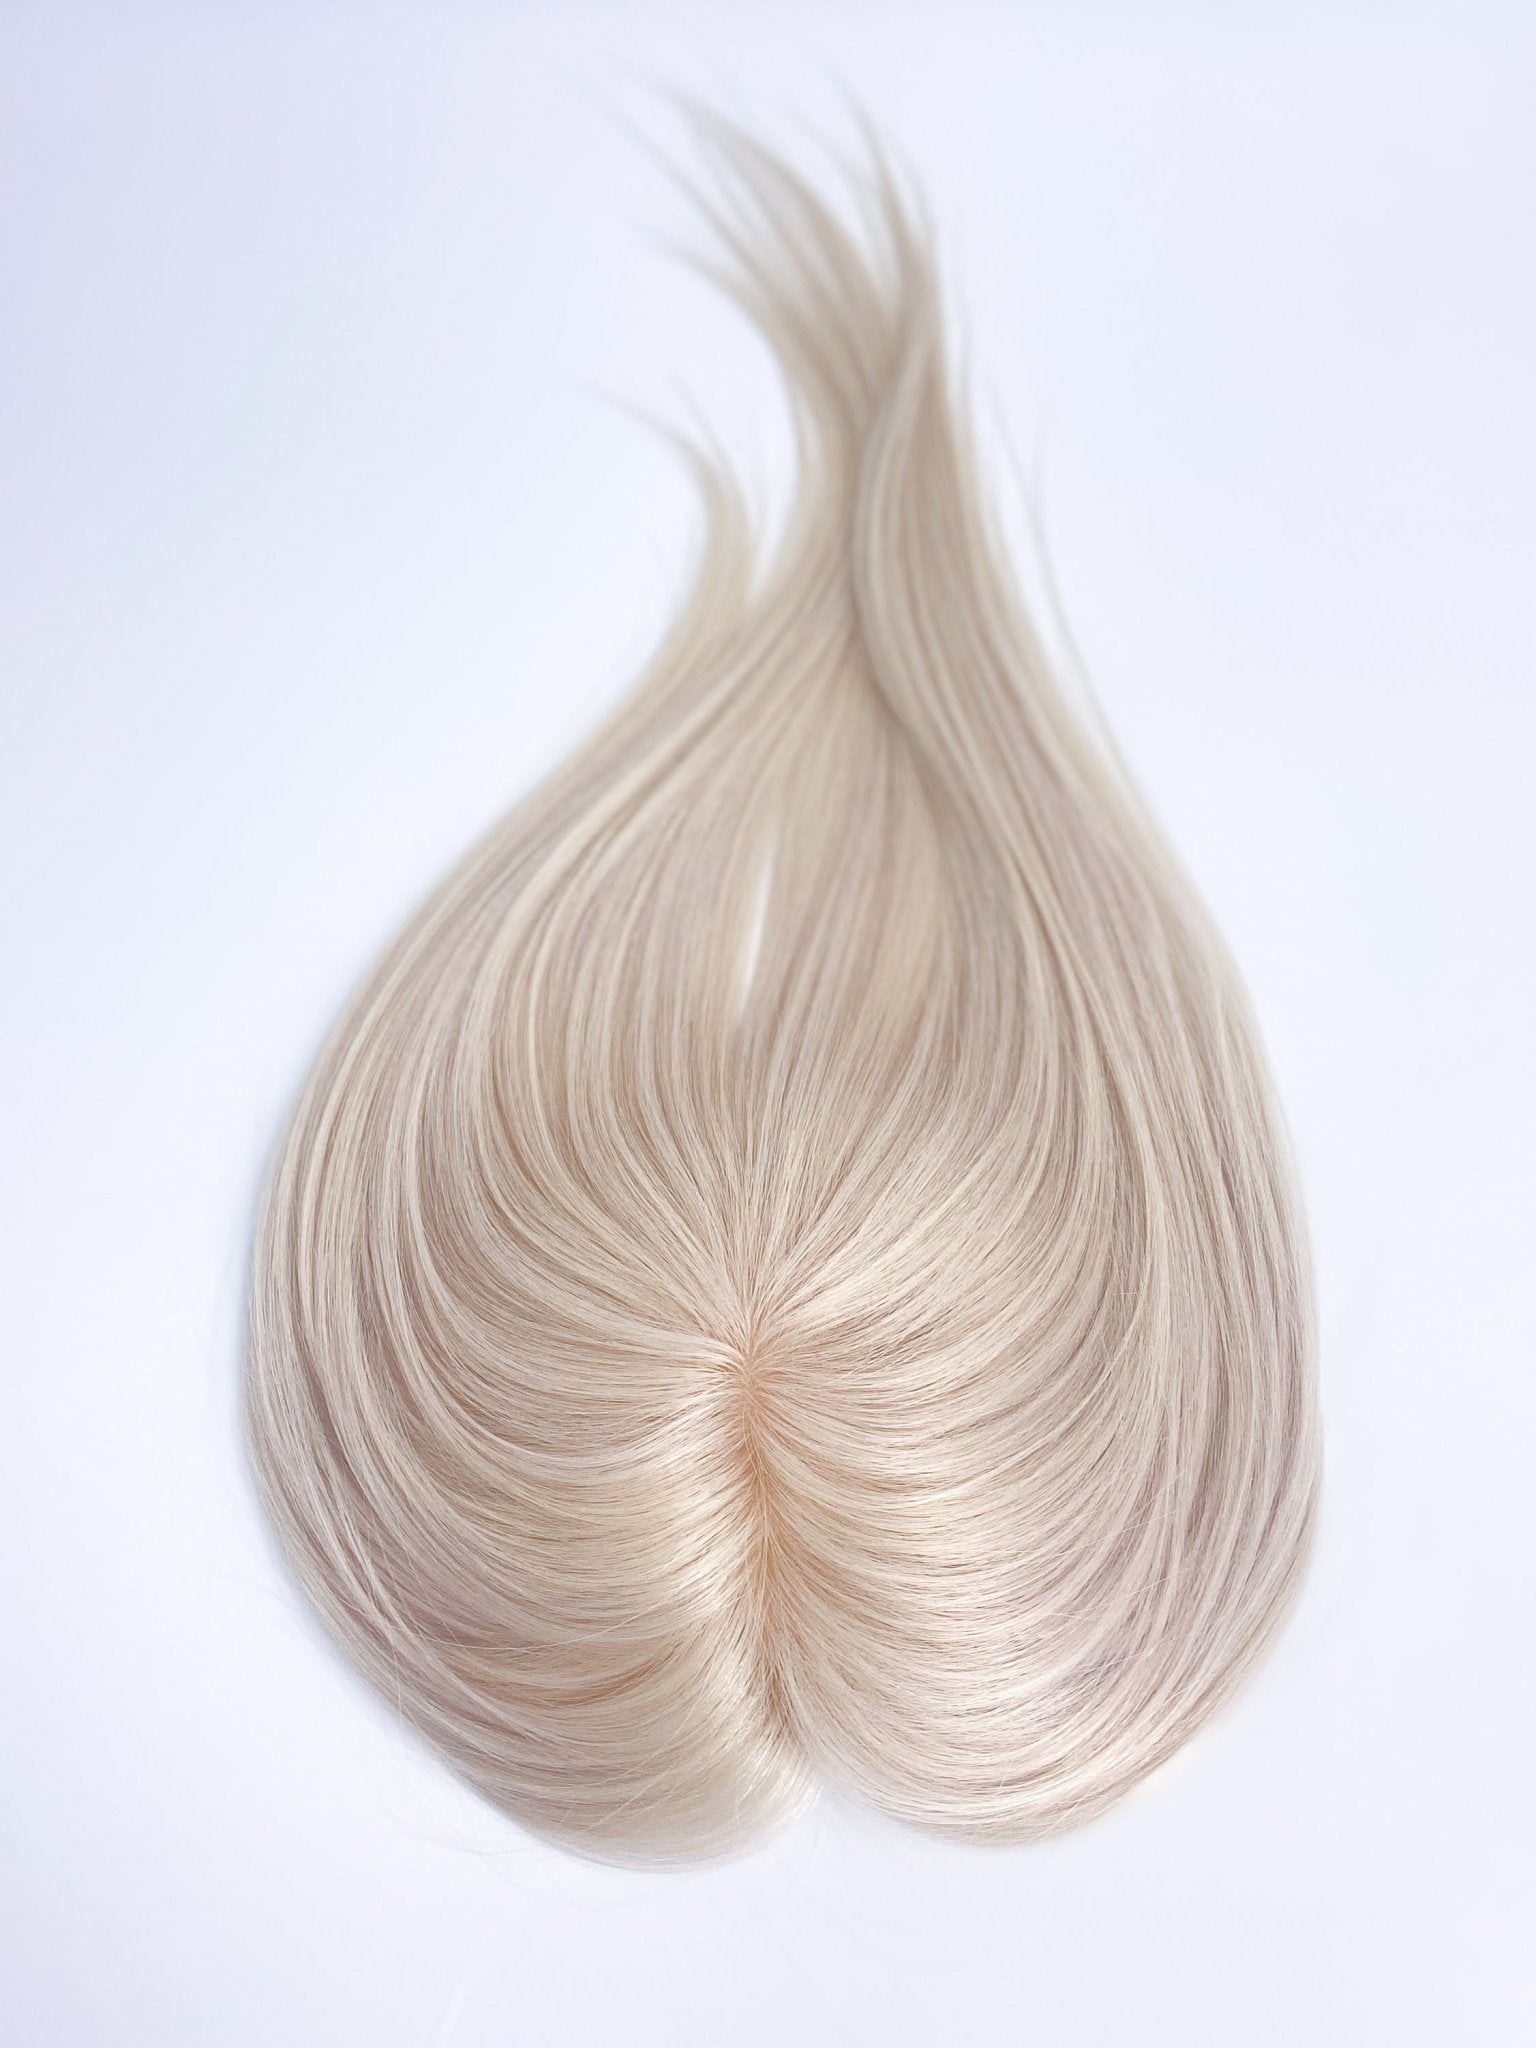 White Blonde Silk Topper 5x5 - 12 inches - withlovebeautycollective